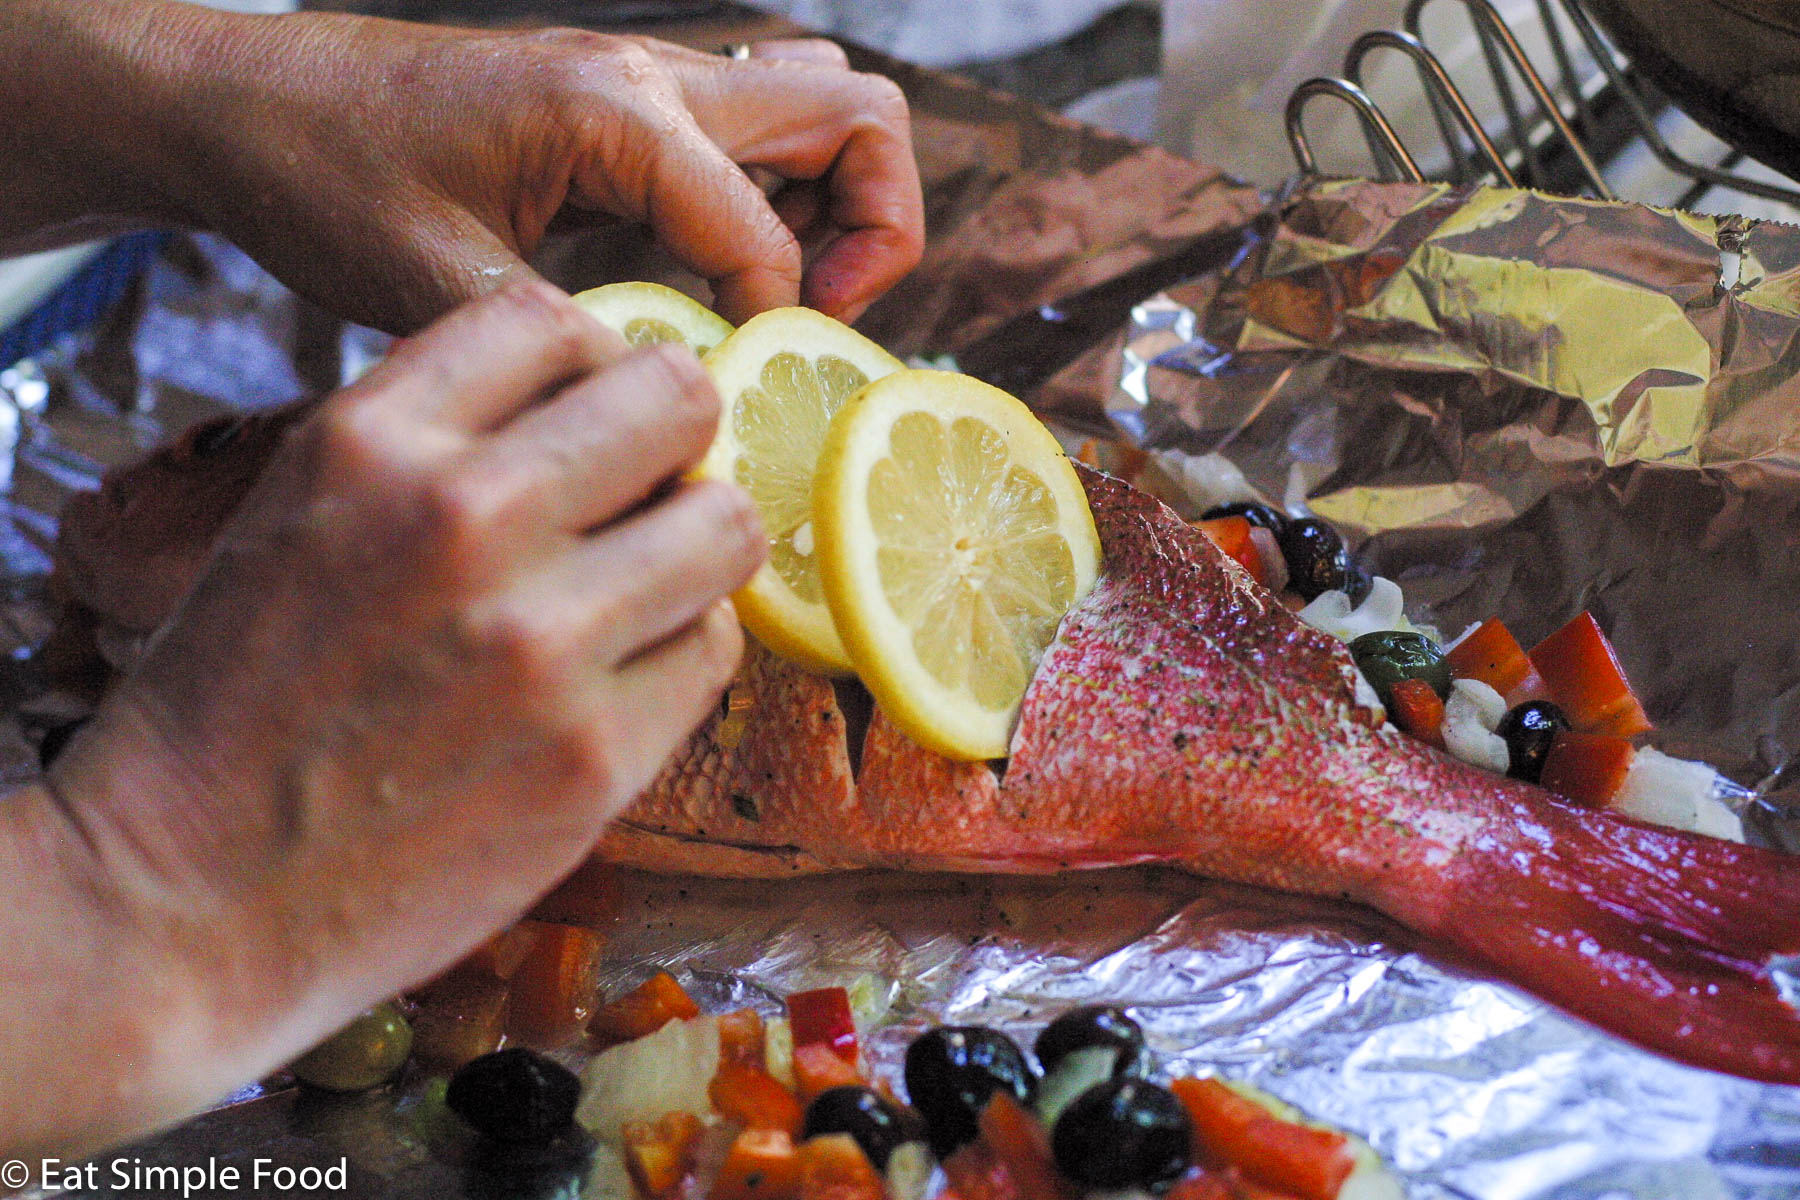 Red Snapper with slices in the whole fish and hands putting lemon slices into the fish.